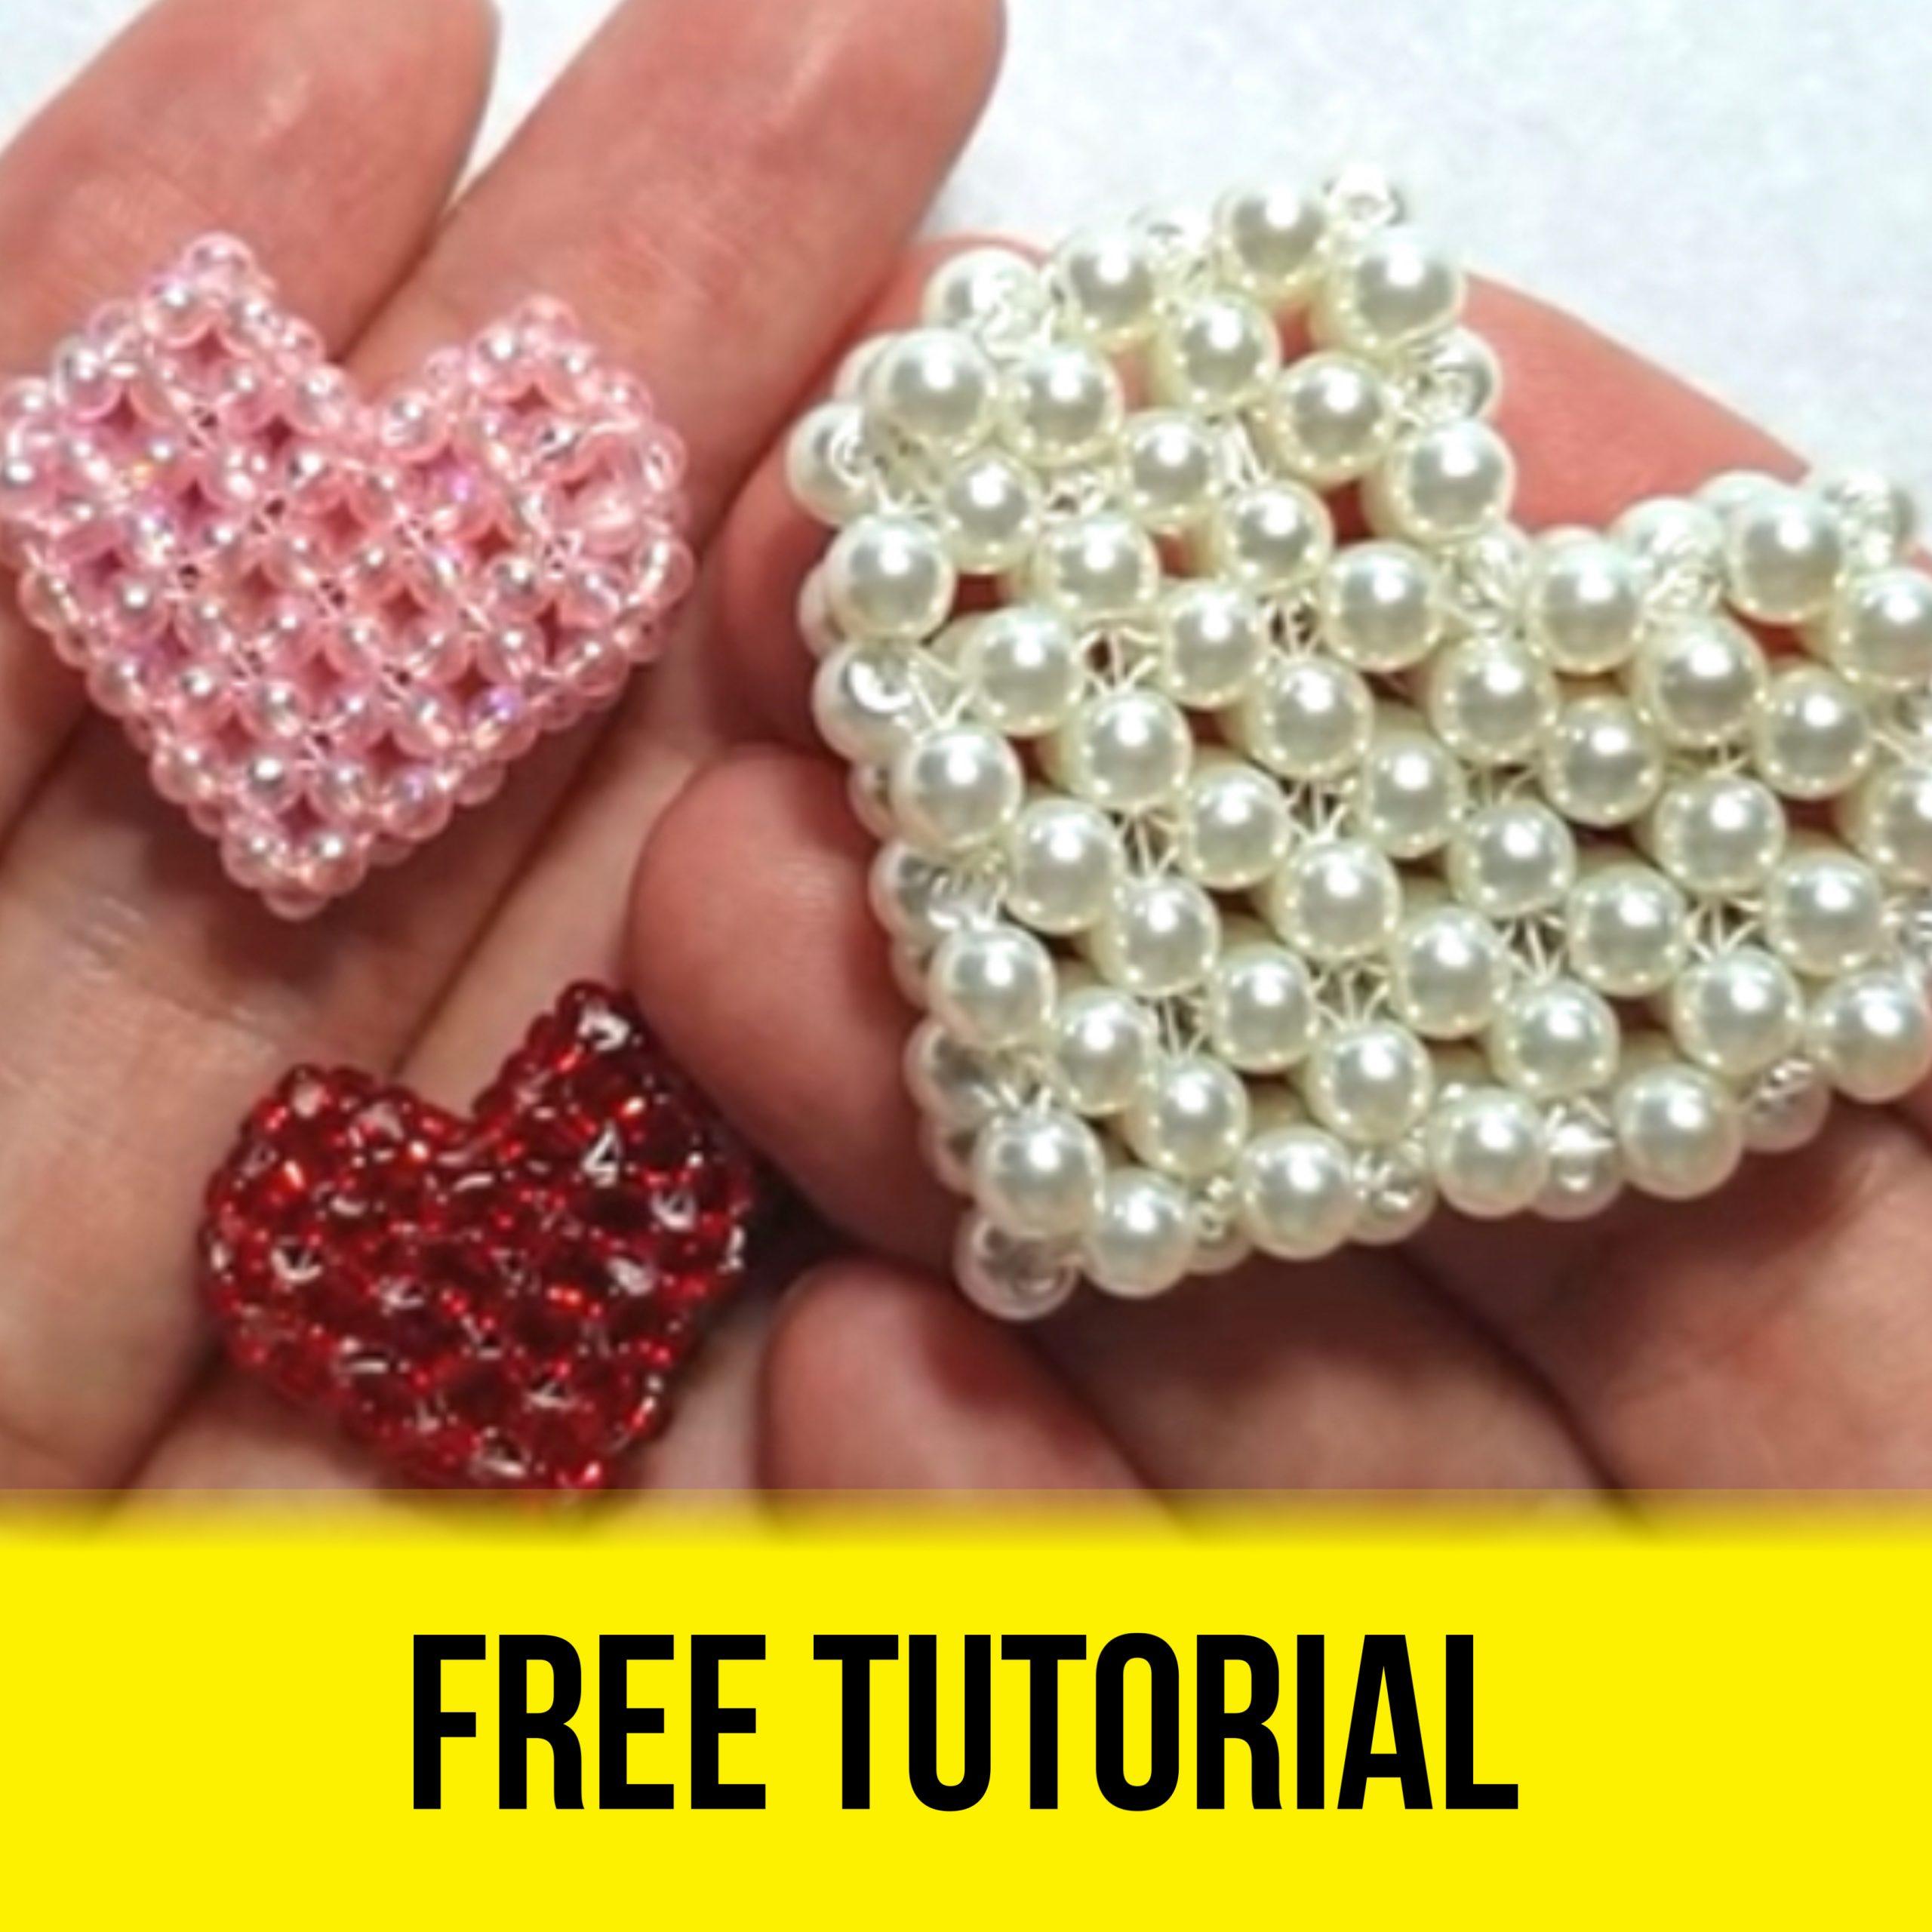 How to make heart by beads, Heart of beads, Brick stitch